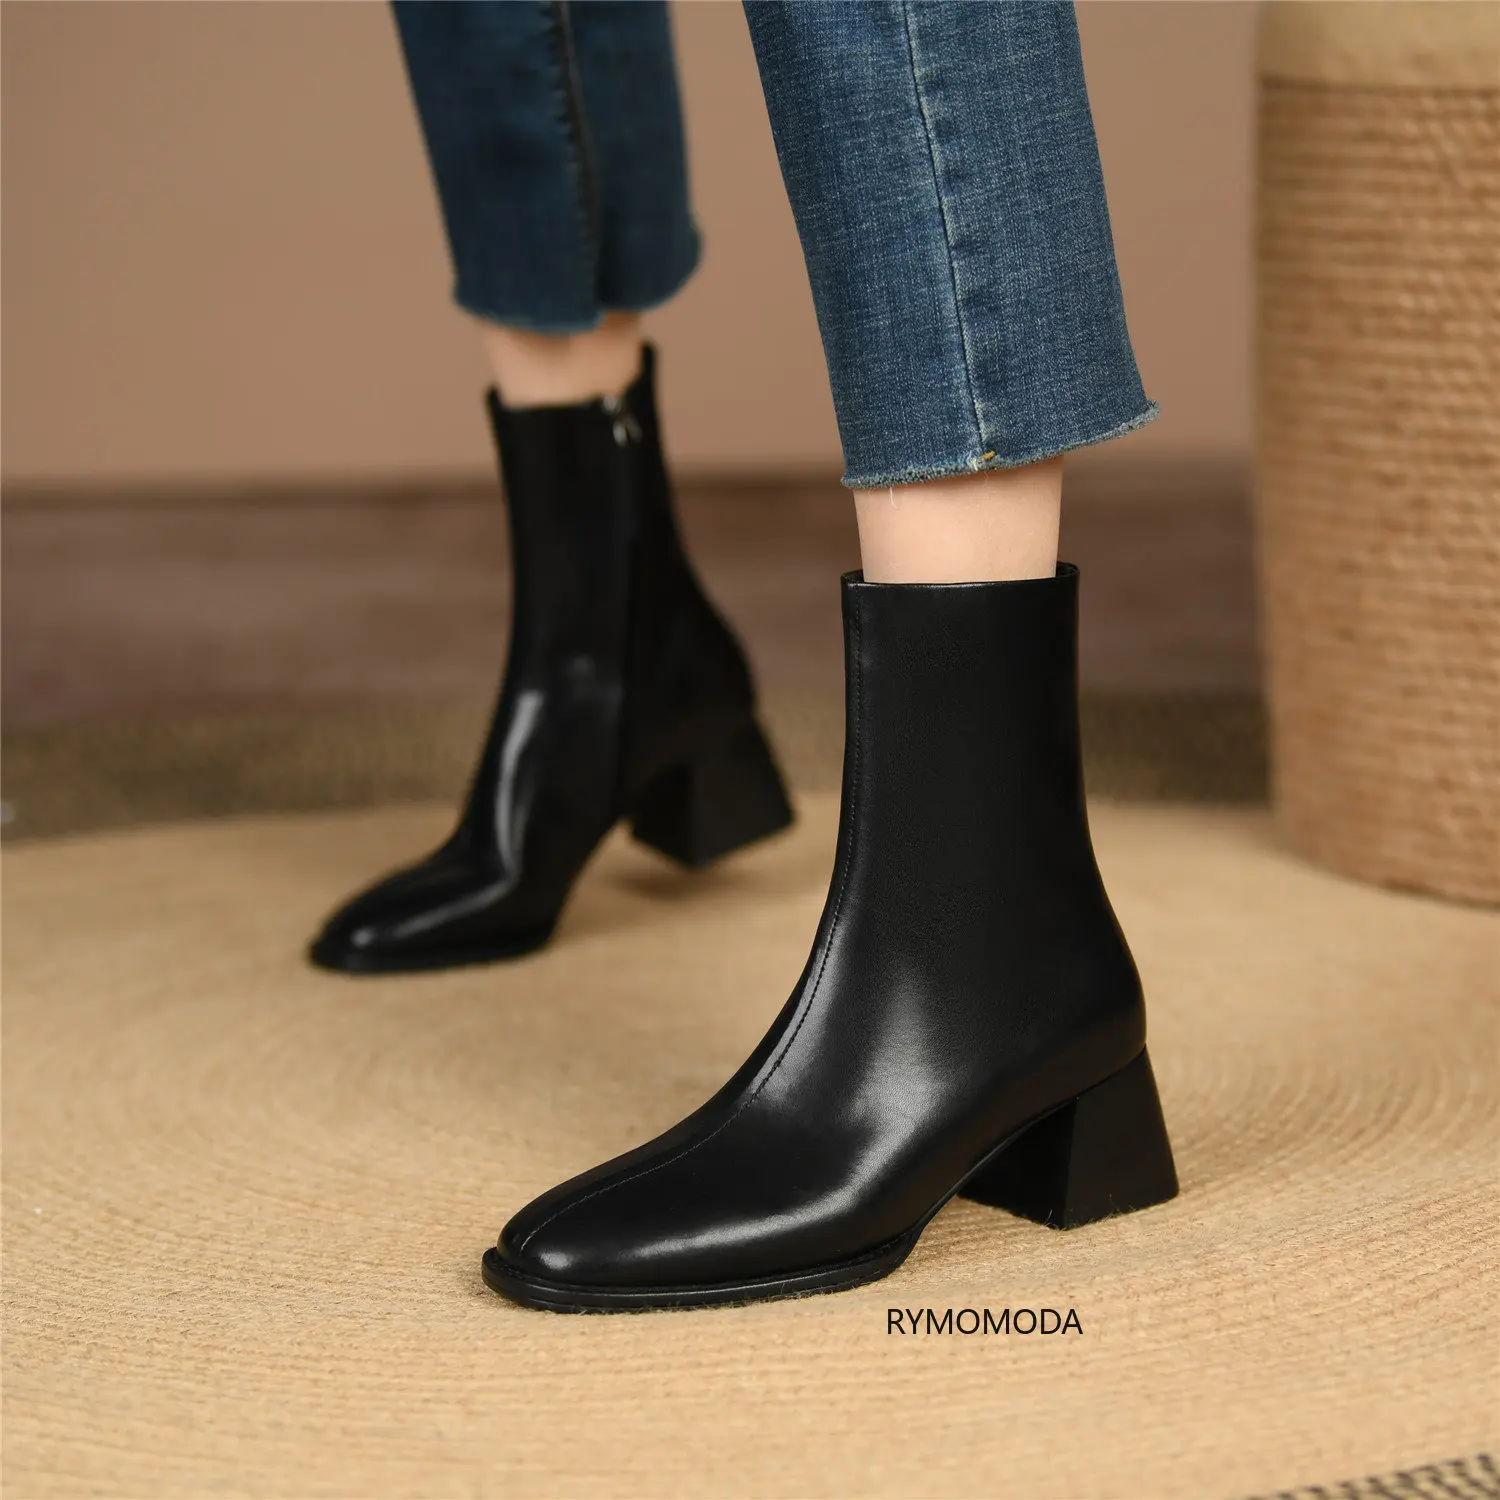 High Stiletto Heel Short Black High Heel Boots For Women Hot Sale With  Pointed Toe, Thin Heels, And Fast Shipping Cool Martin Style Ankle Black  High Heel Boots 9cm From Buqu, $34.59 |